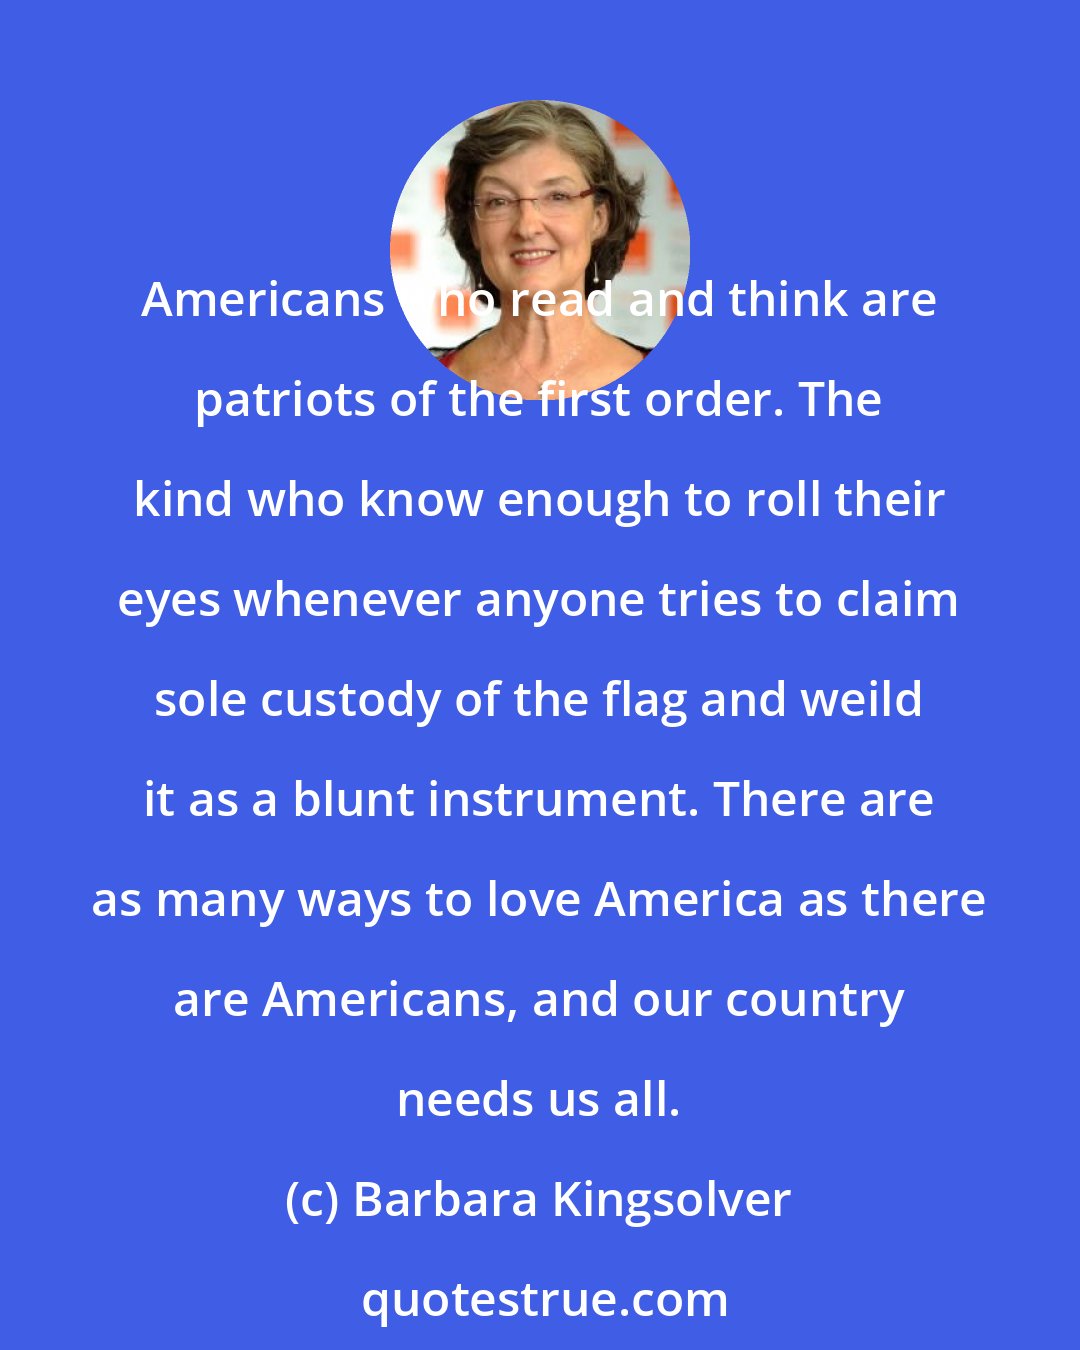 Barbara Kingsolver: Americans who read and think are patriots of the first order. The kind who know enough to roll their eyes whenever anyone tries to claim sole custody of the flag and weild it as a blunt instrument. There are as many ways to love America as there are Americans, and our country needs us all.